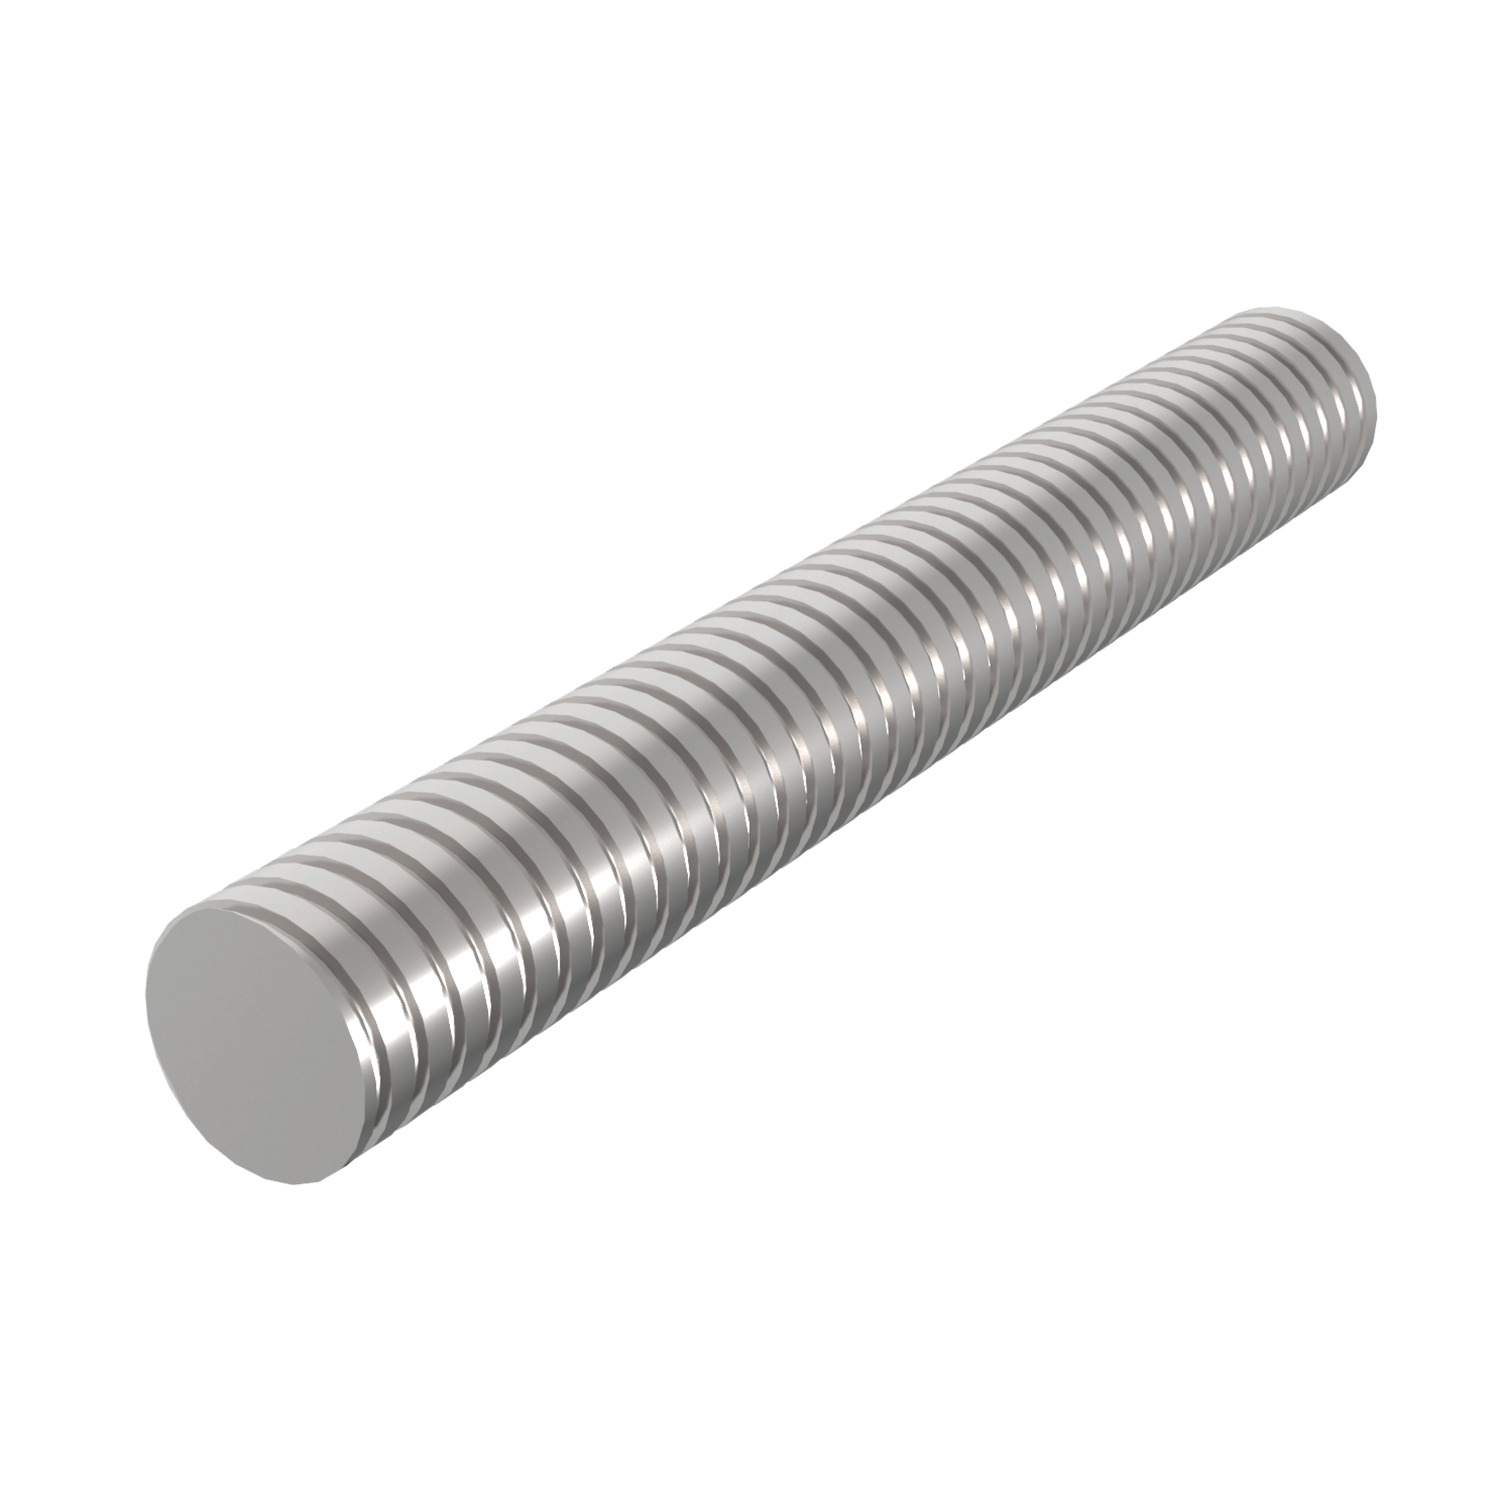 Stainless Lead Screws Rolled trapezoidal AISI 316 grade (A4) stainless lead screws, right hand thread. Surface hardness 280HB. Lengths of up to 6 meters can be provided. Tr 10 to Tr 120.